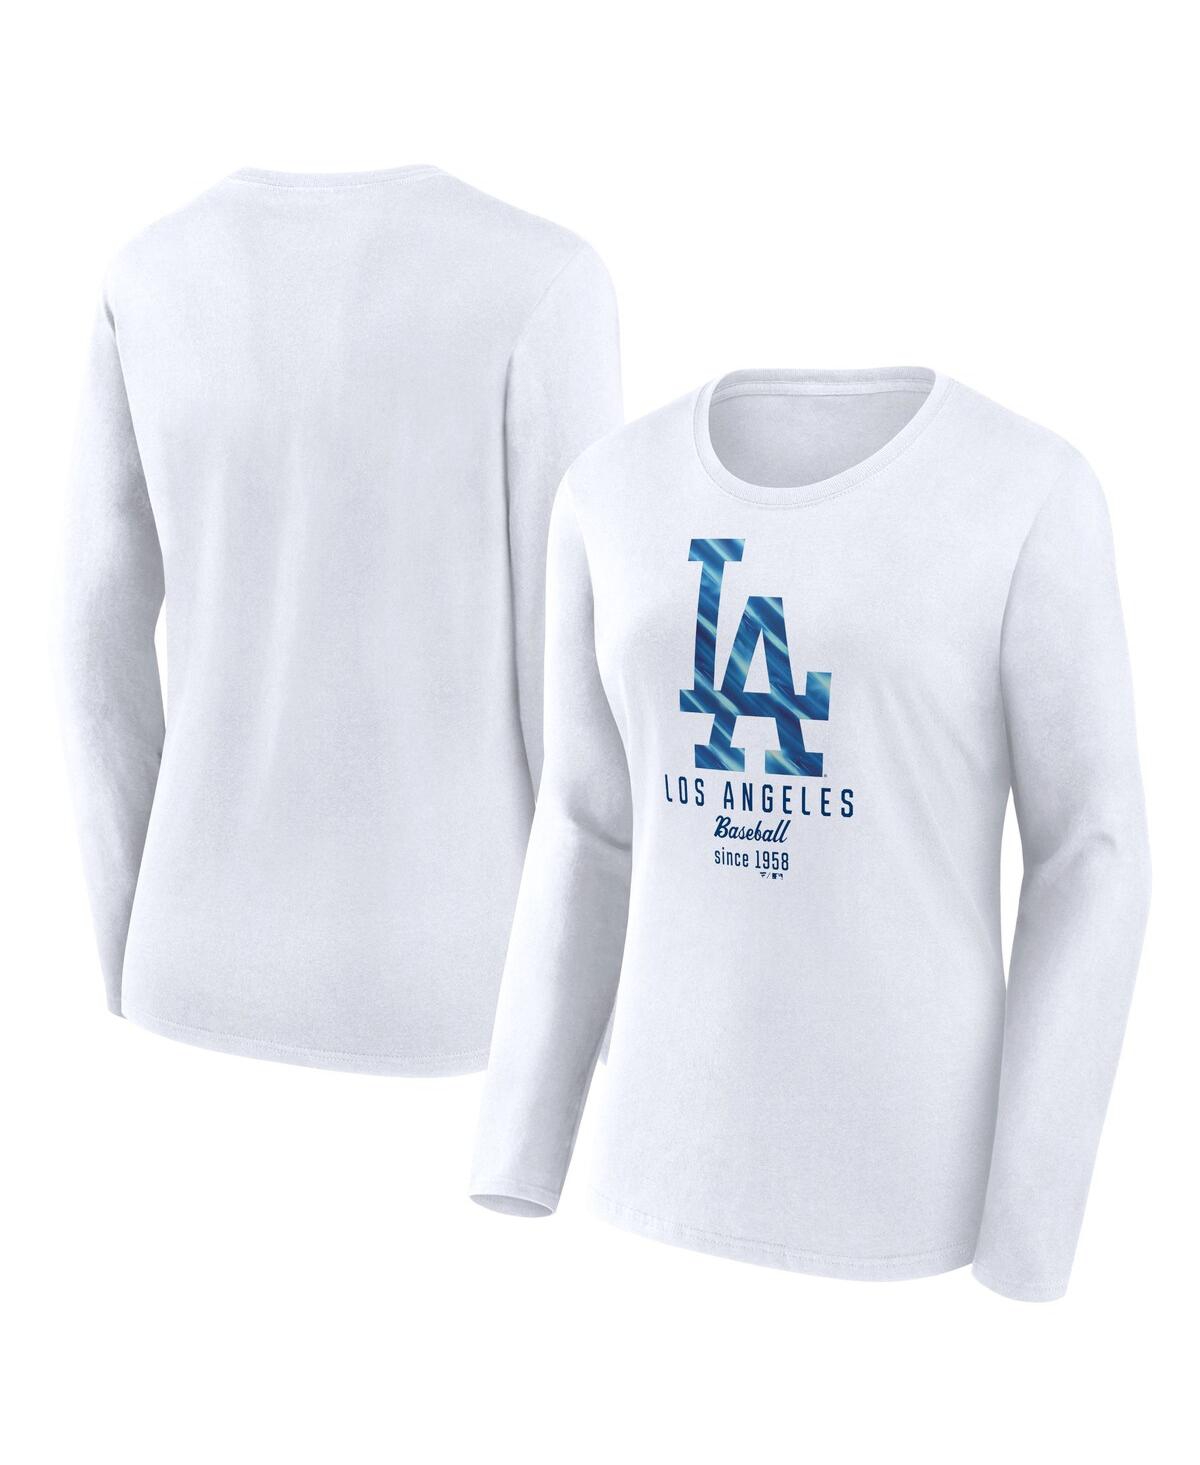 Women's Fanatics White Los Angeles Dodgers Lightweight Fitted Long Sleeve T-shirt - White